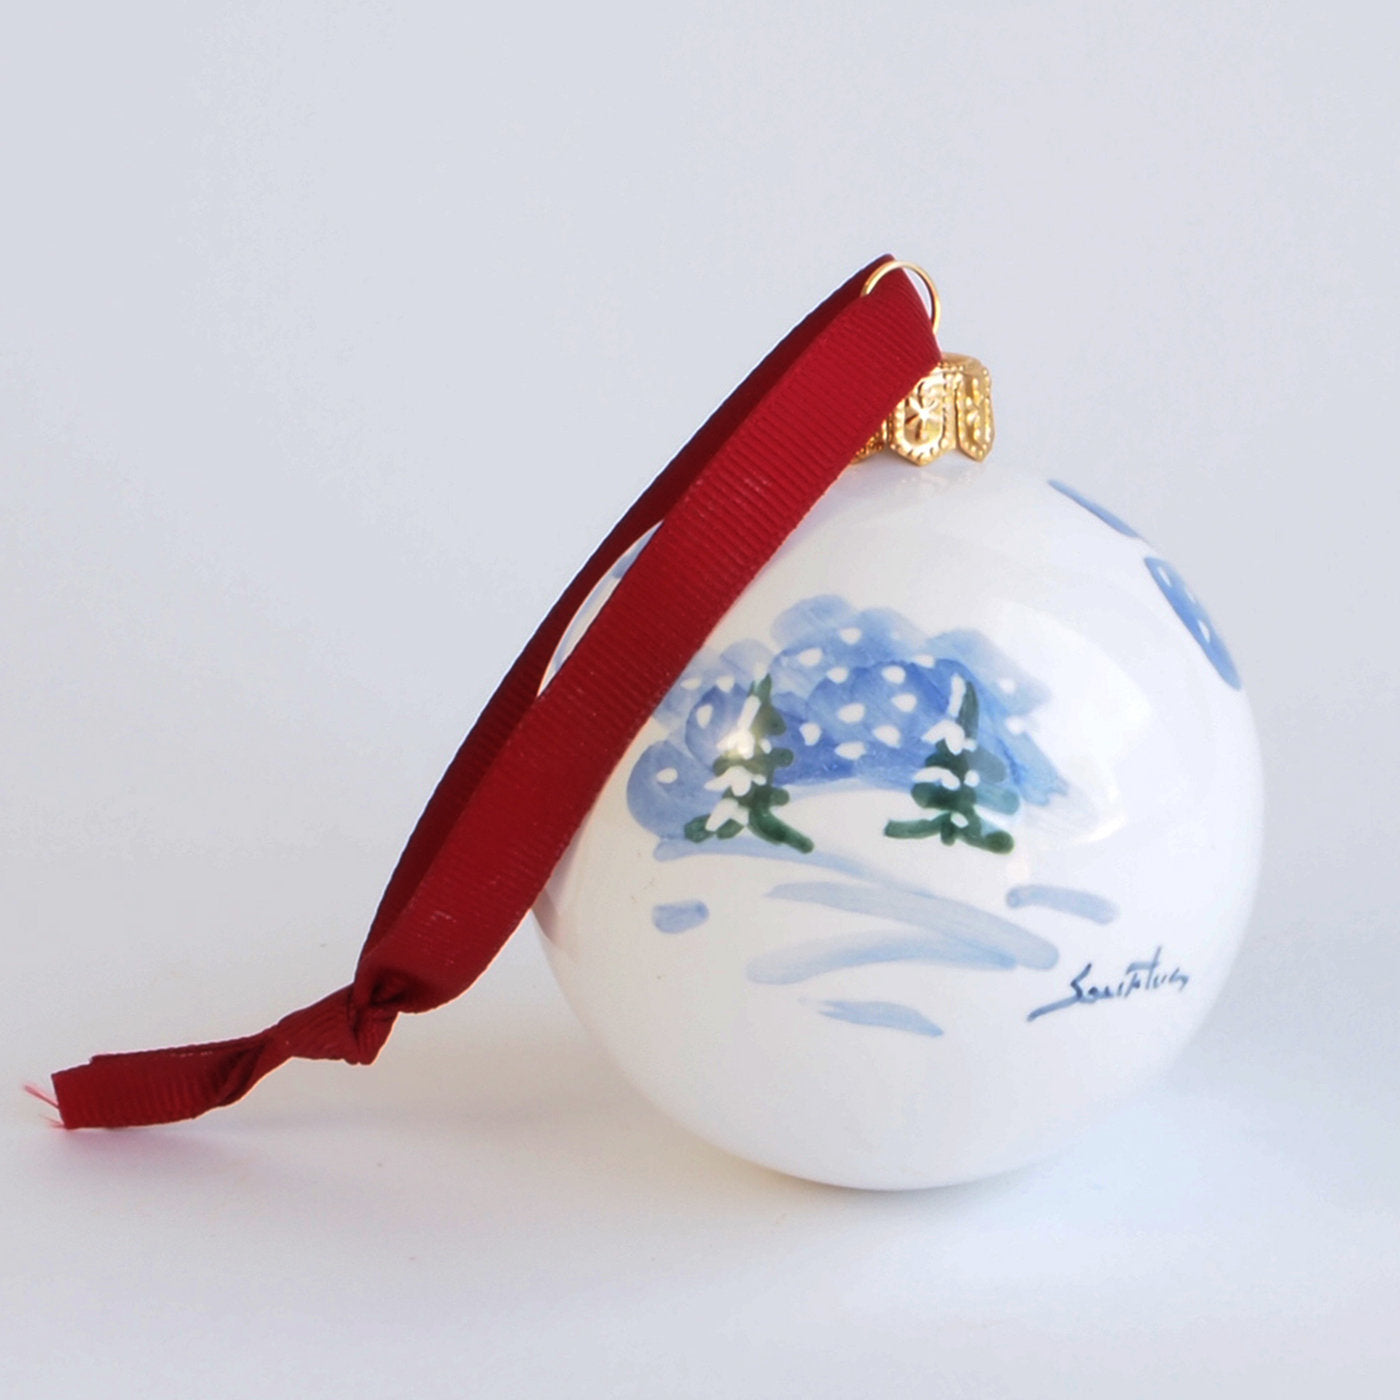 Blue Winter Christmas Ball Ornament with Red Ribbon - Alternative view 1